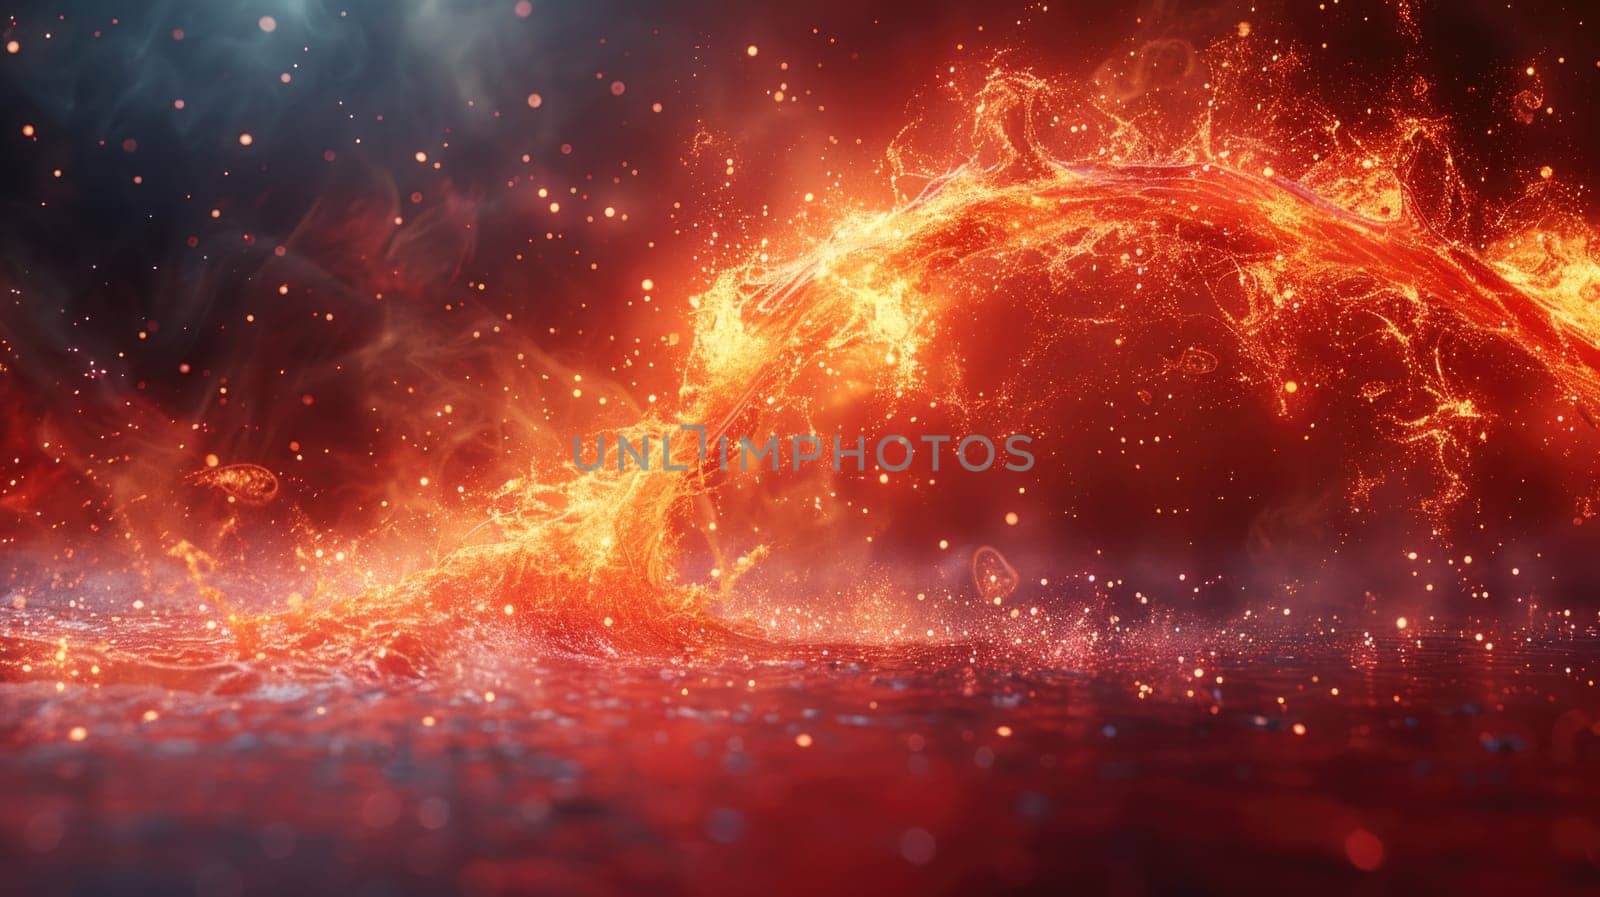 An intense fireball bursts in the center of a deep dark backdrop, filling the frame with its radiant glow.